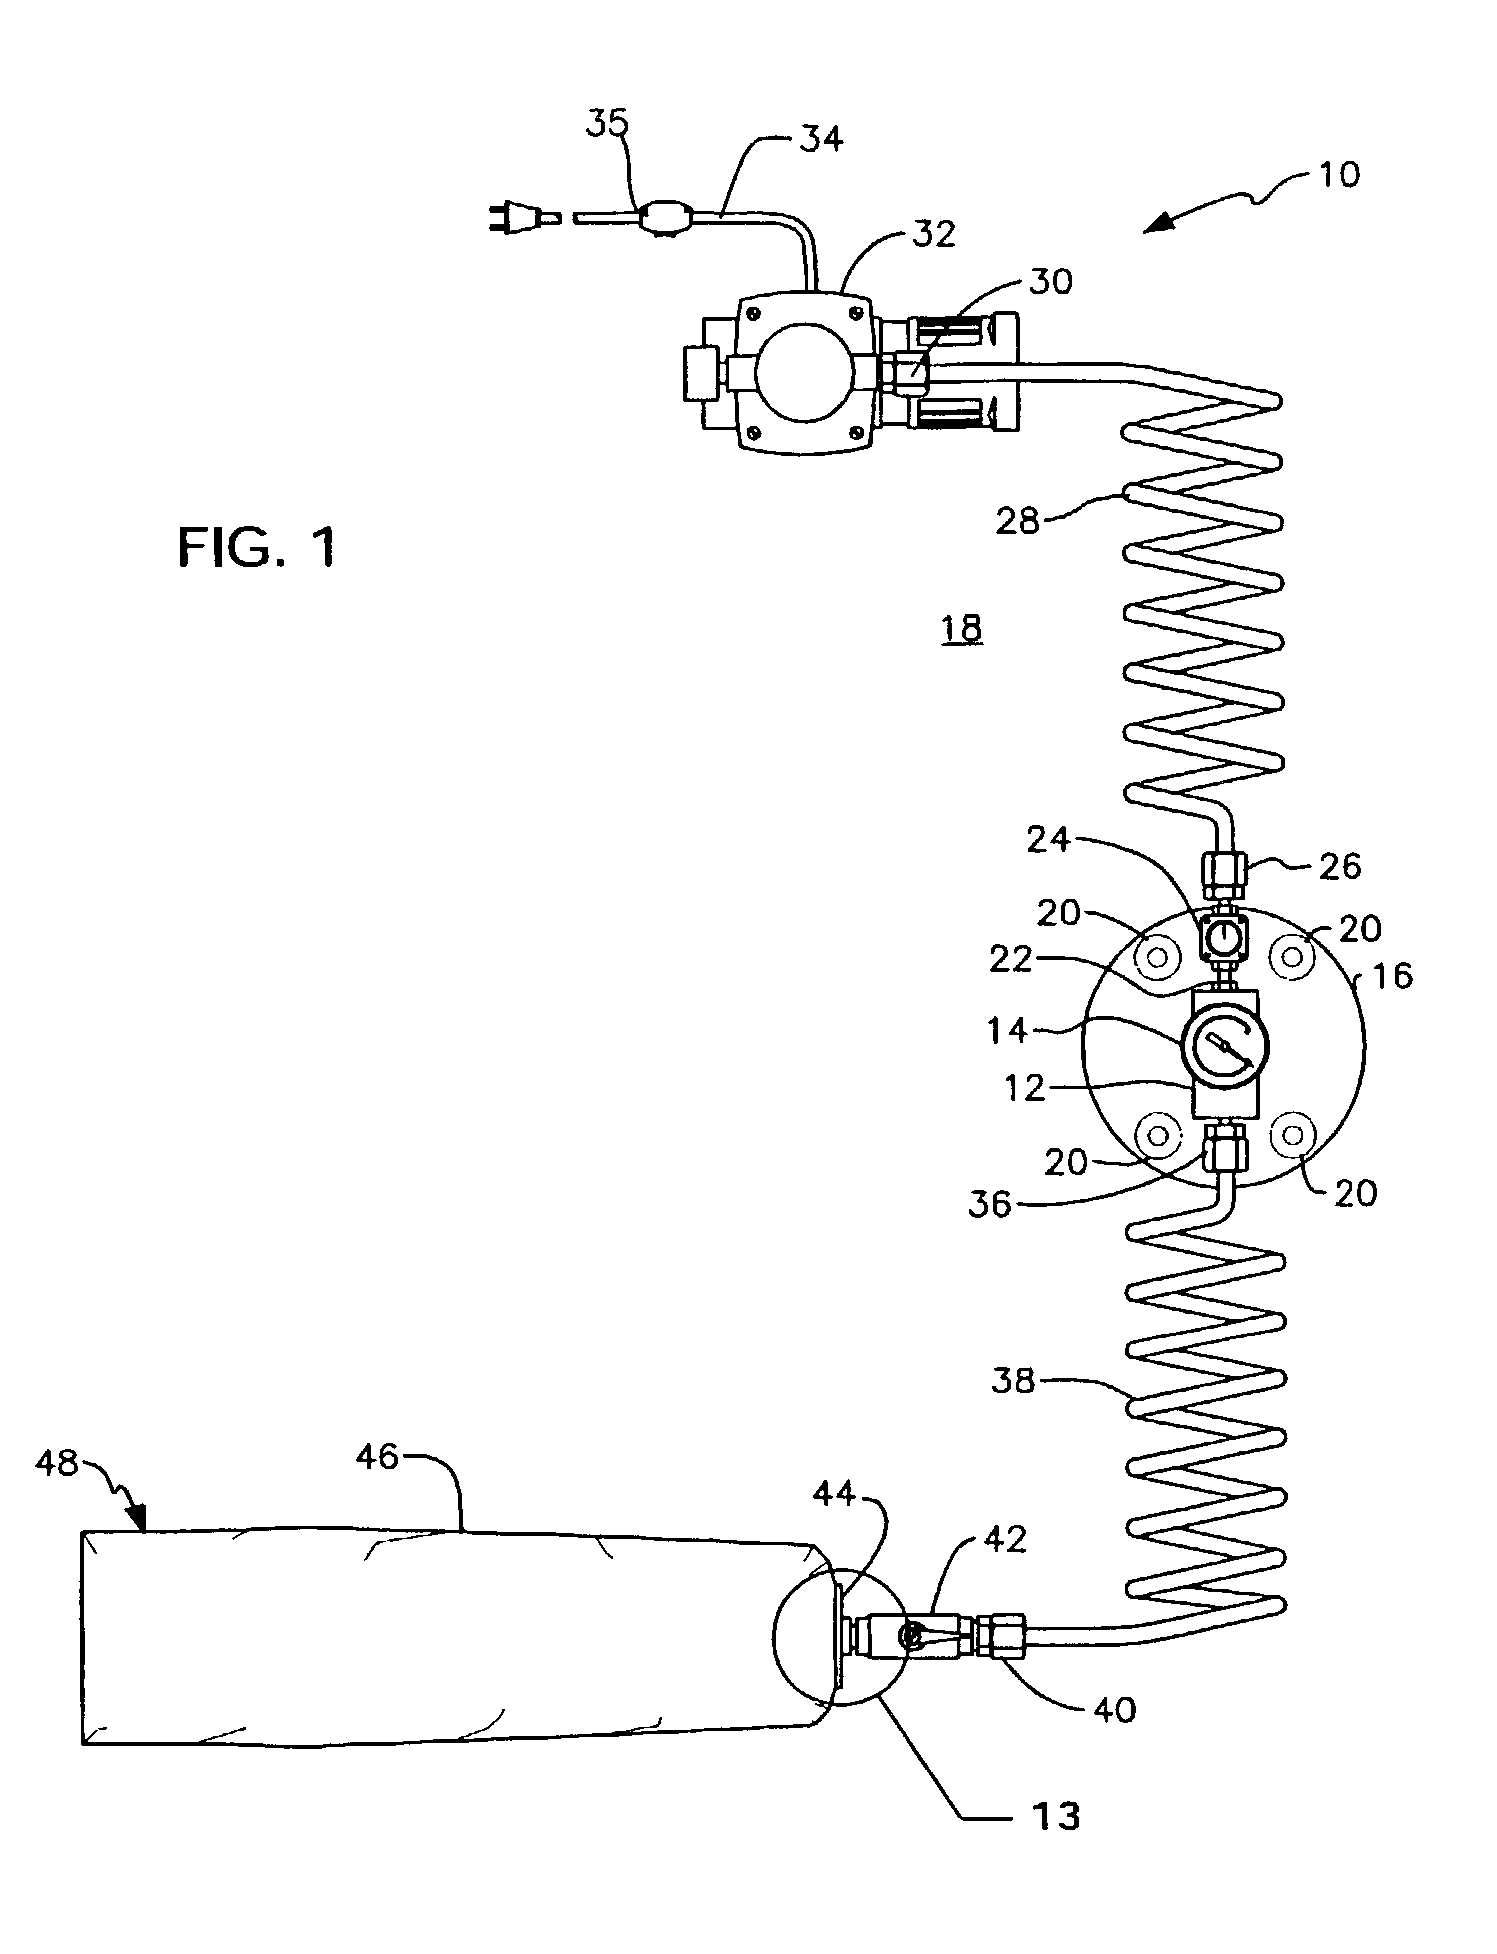 Apparatus for casting a prosthetic socket under vacuum